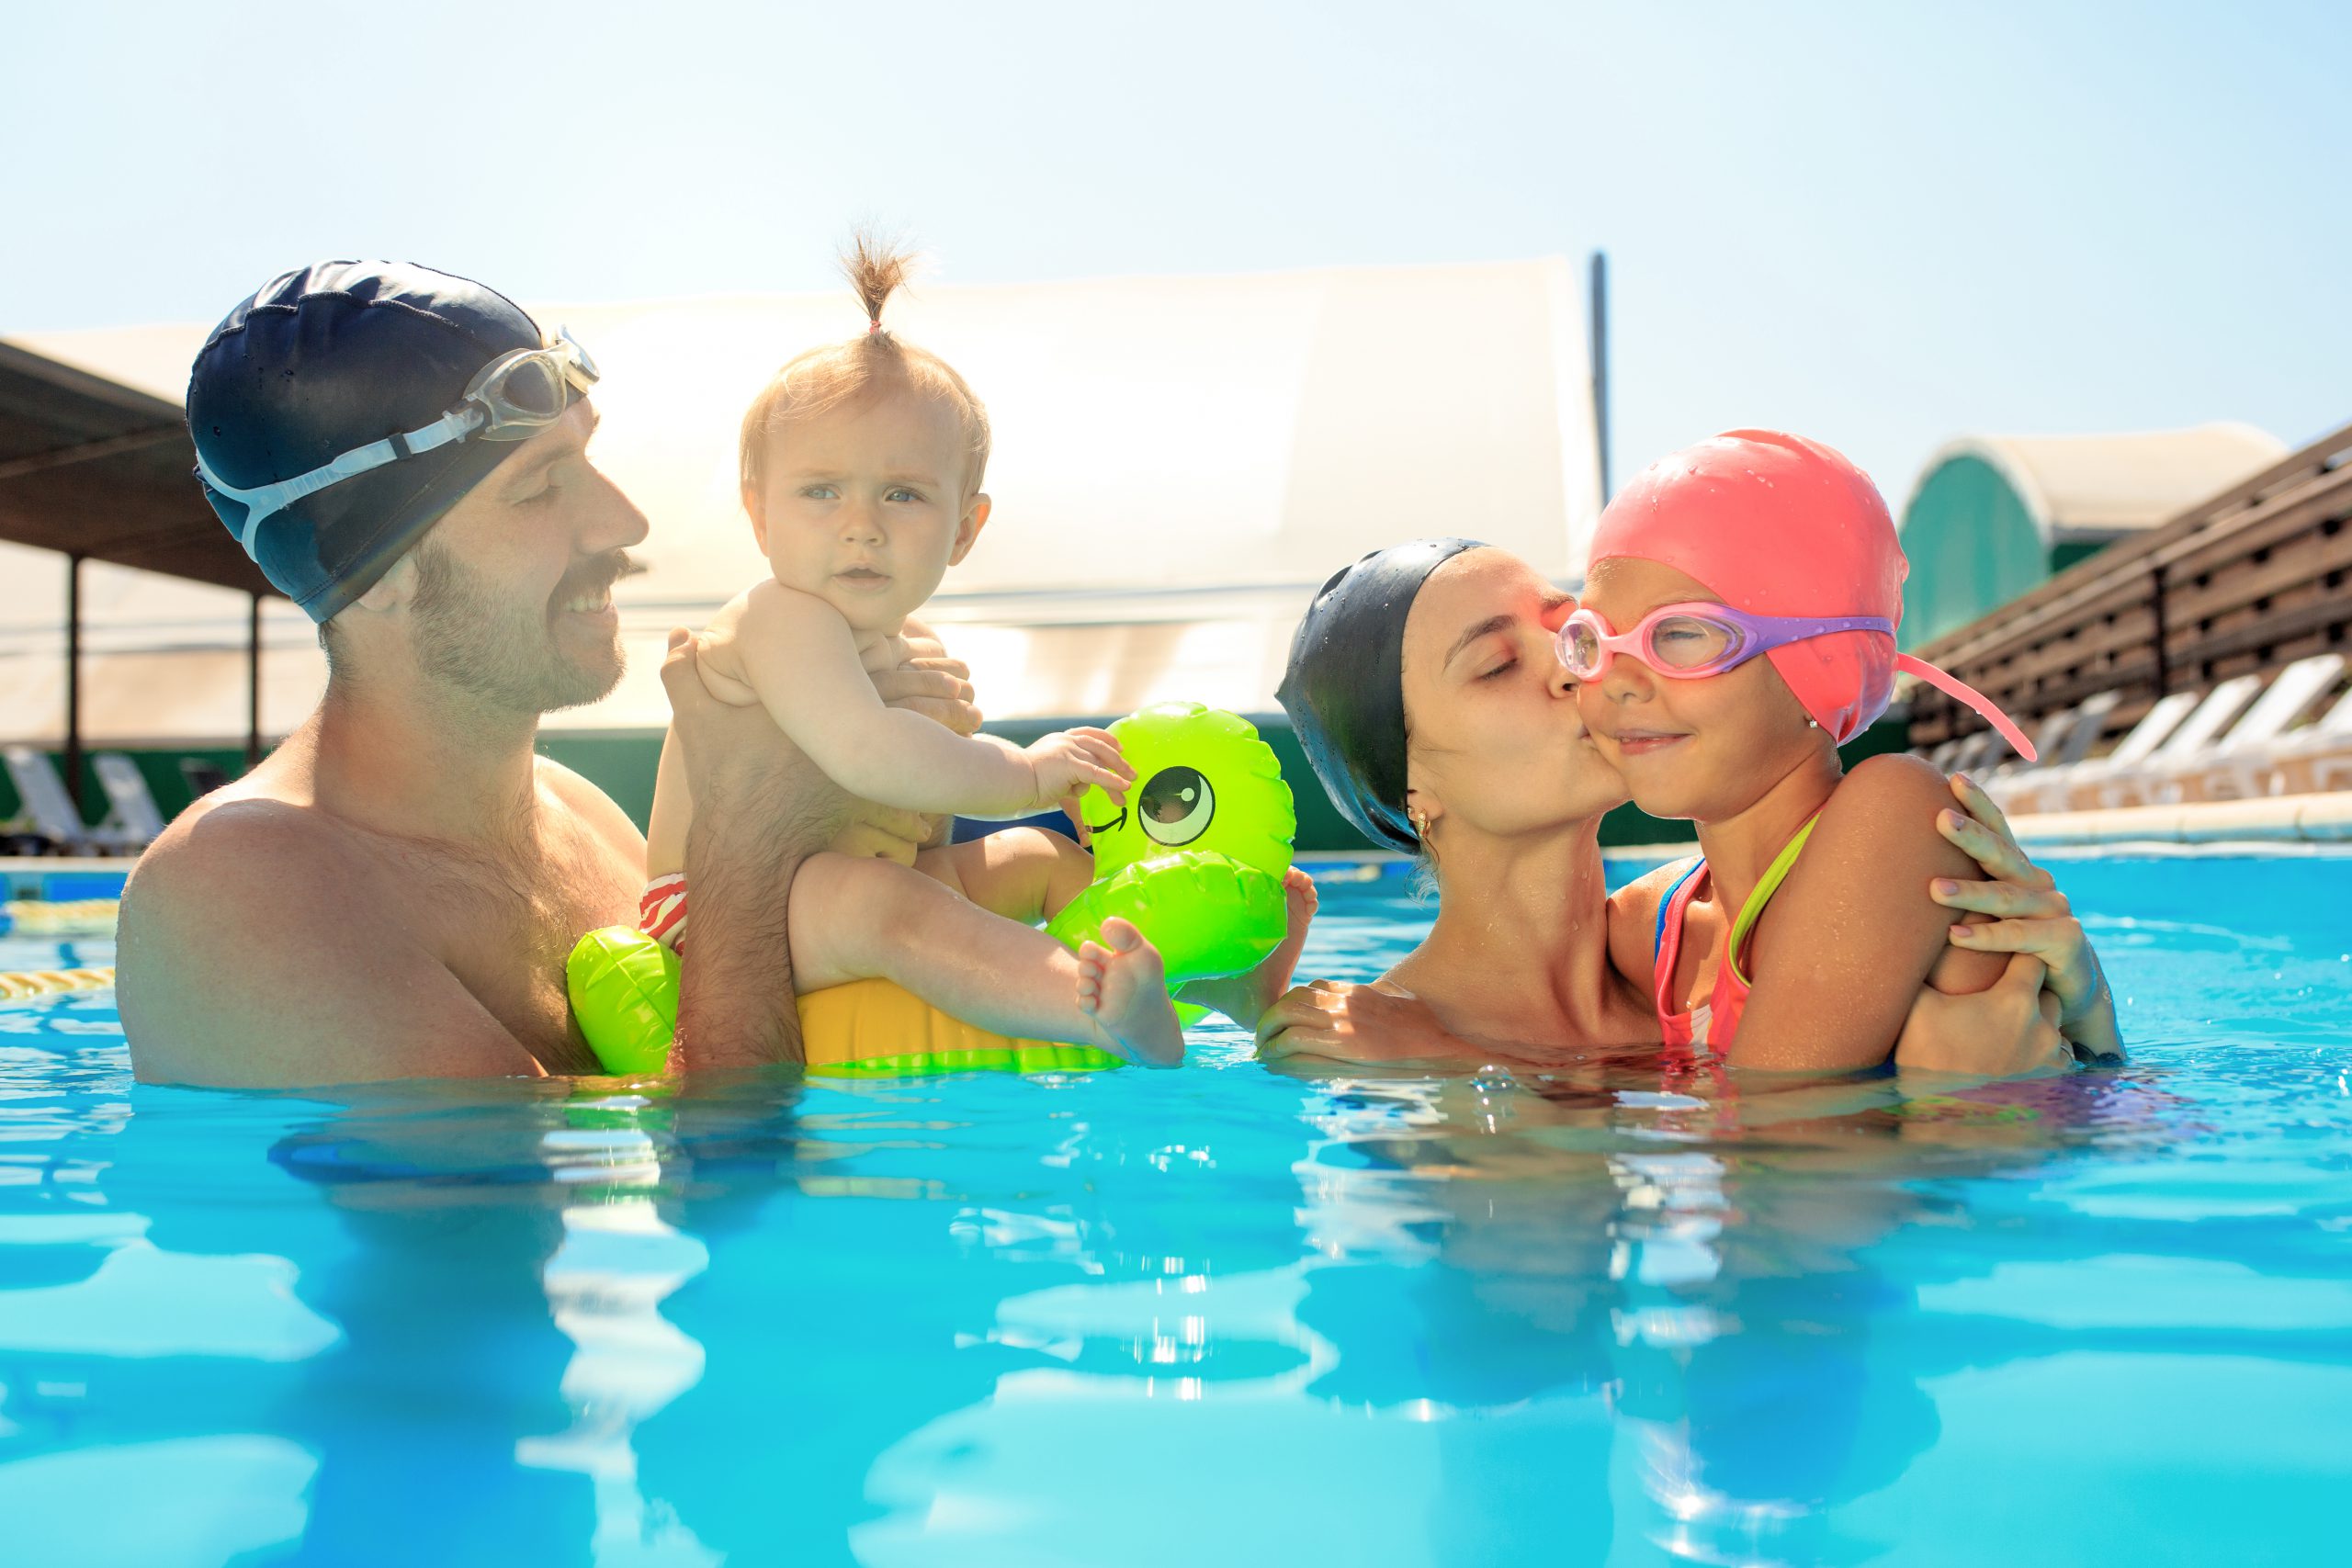 Happy family having fun by the swimming pool. Pool, leisure, swimming, summer, recreation, healthy lifstyle concept